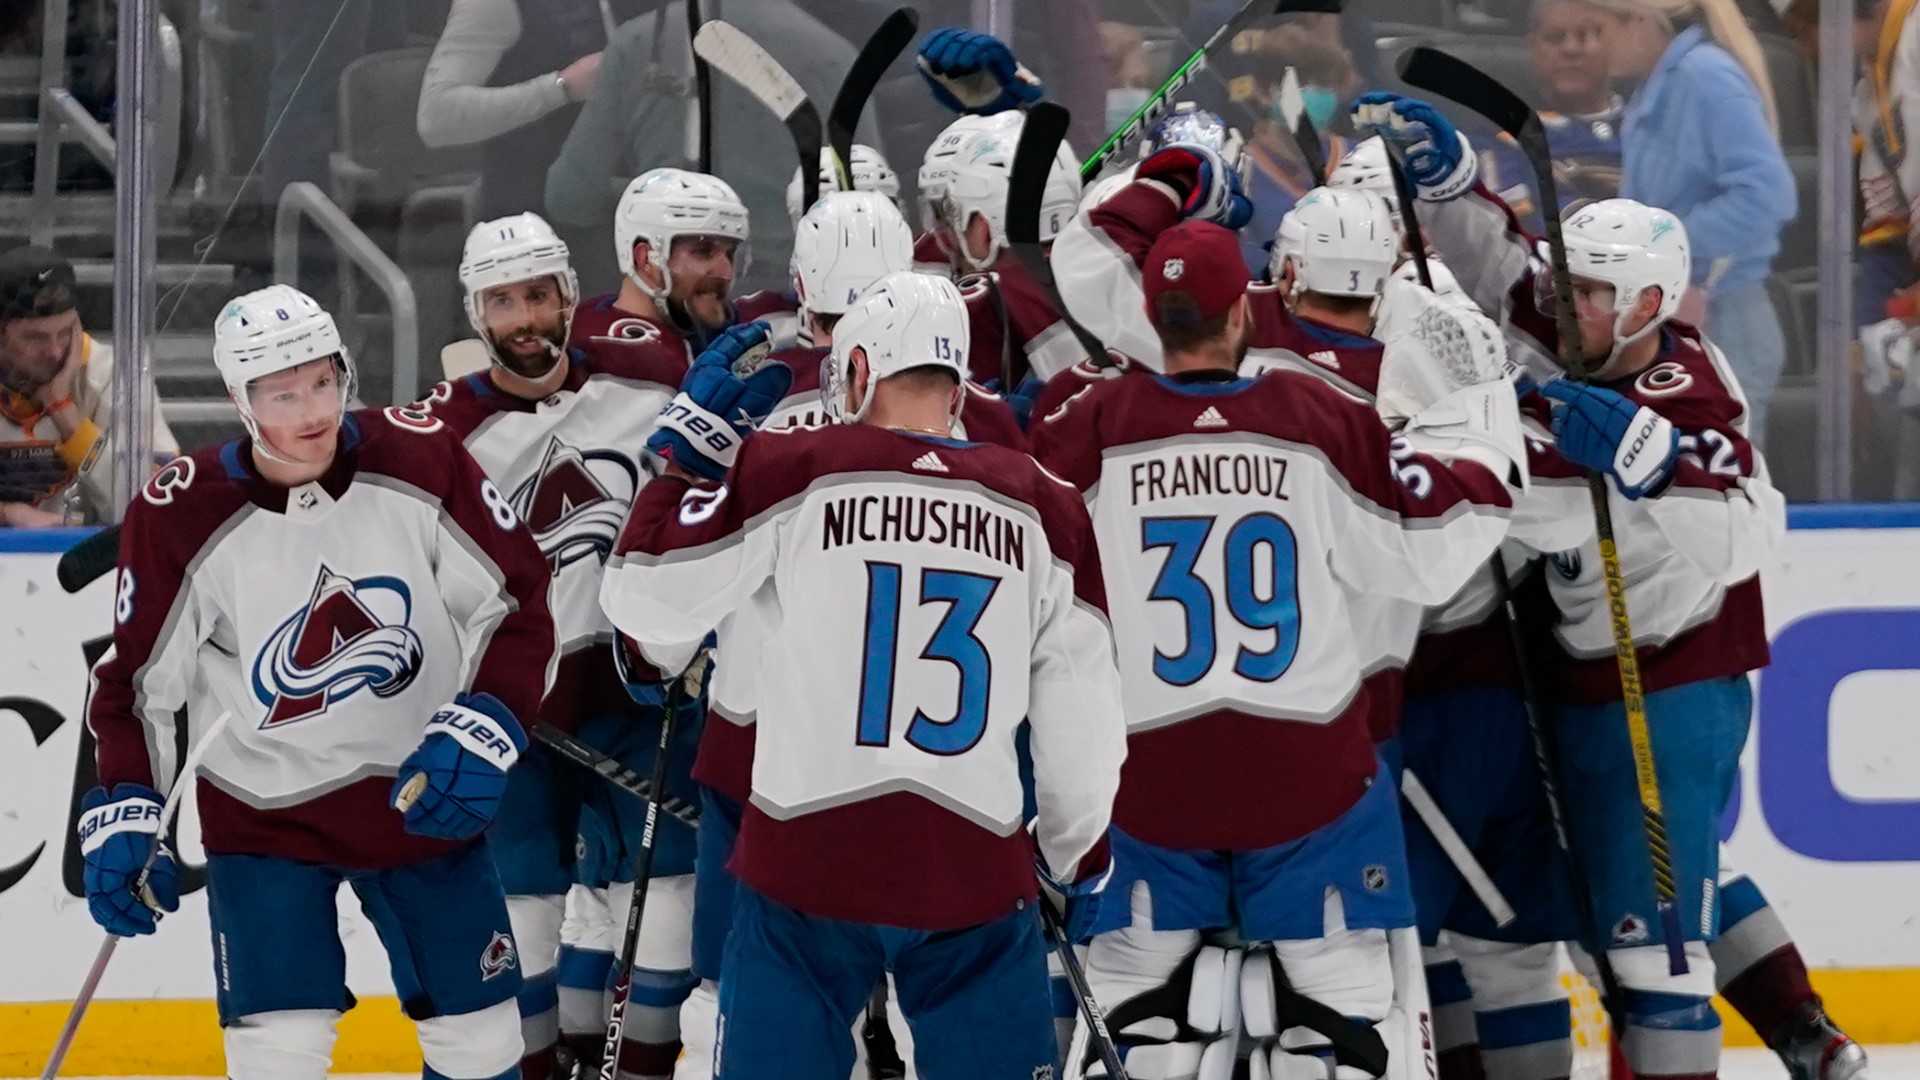 Avalanche advance to conference finals for 1st time since 2002 | 9news.com